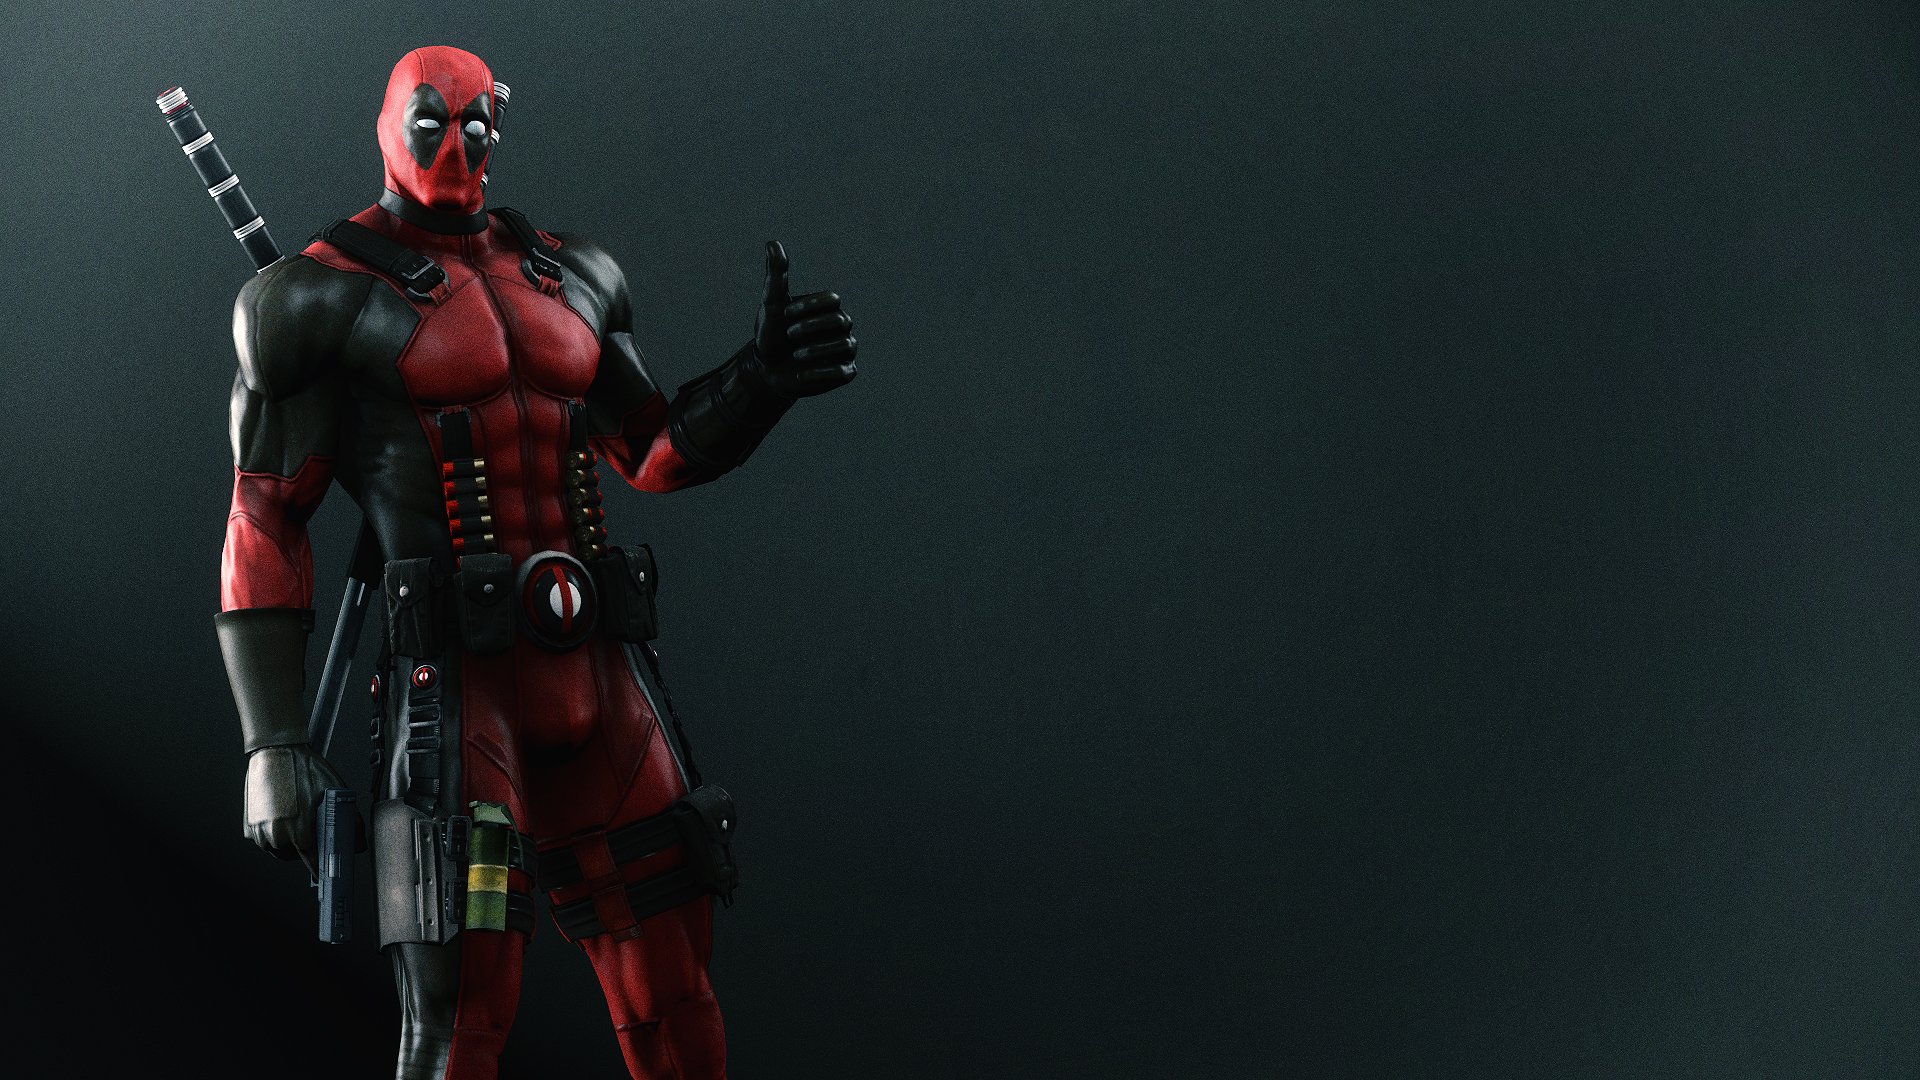 Wallpaper 9 Wallpaper From Deadpool The Video Game